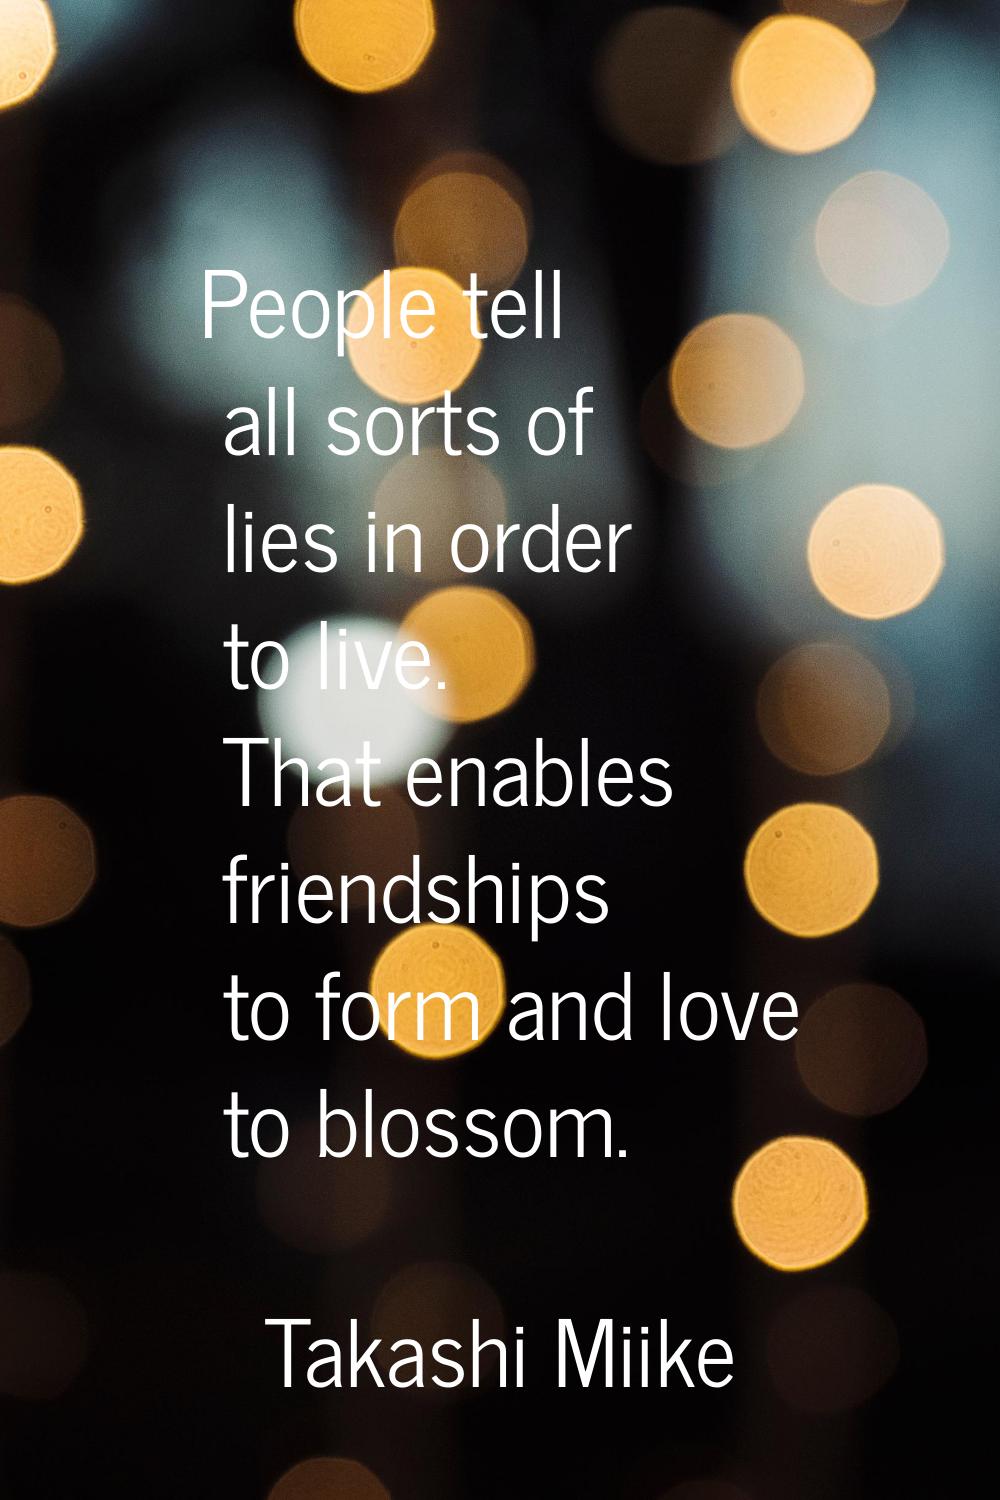 People tell all sorts of lies in order to live. That enables friendships to form and love to blosso